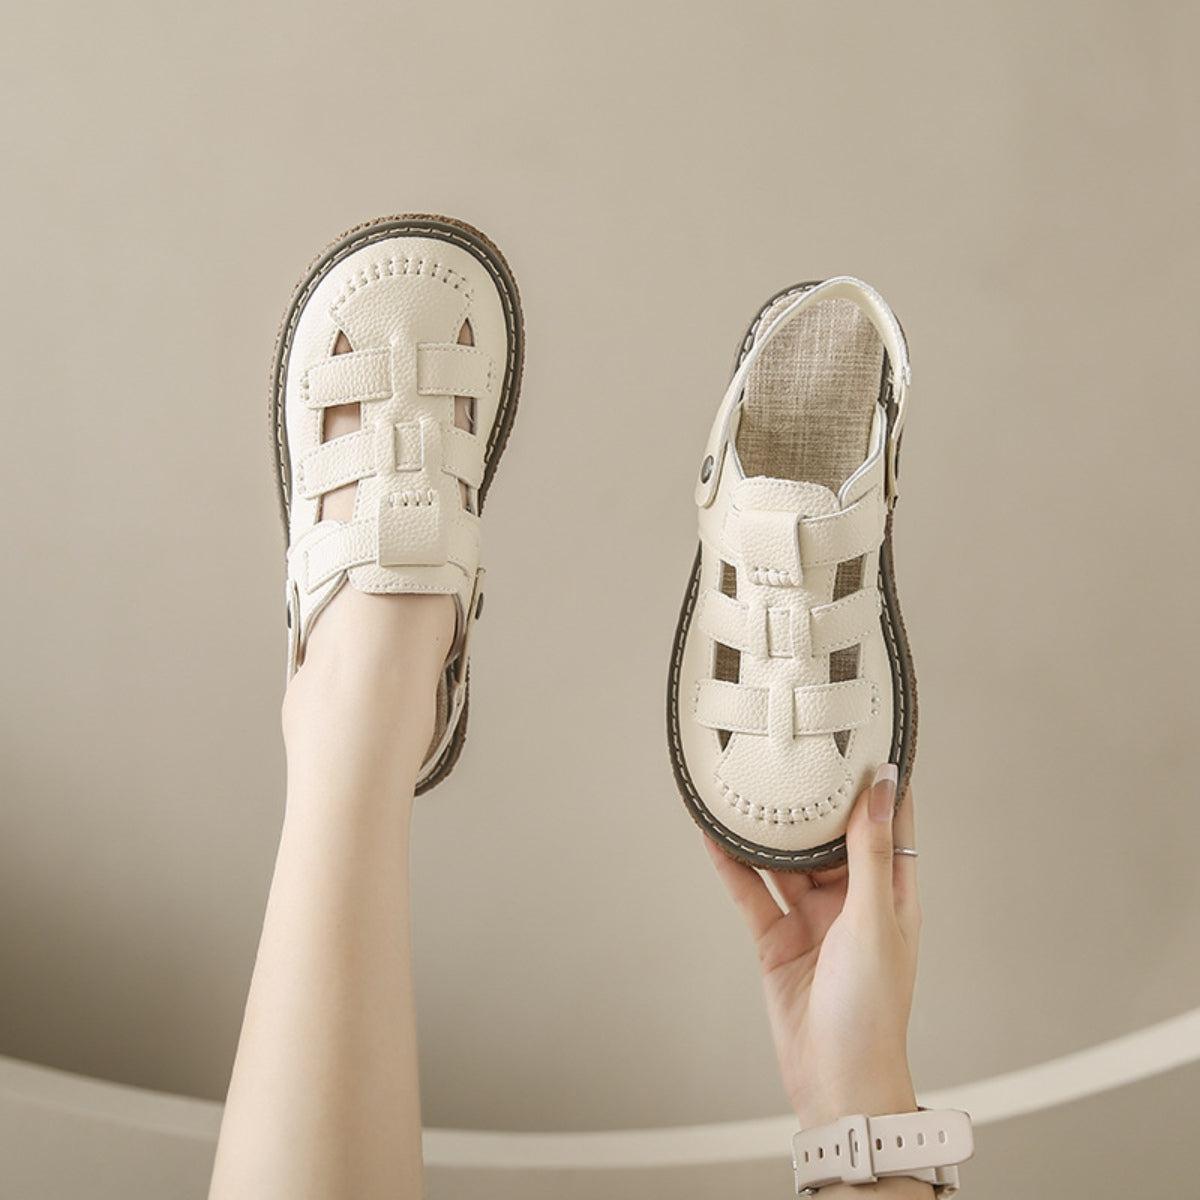 a woman's hand holding a pair of white shoes